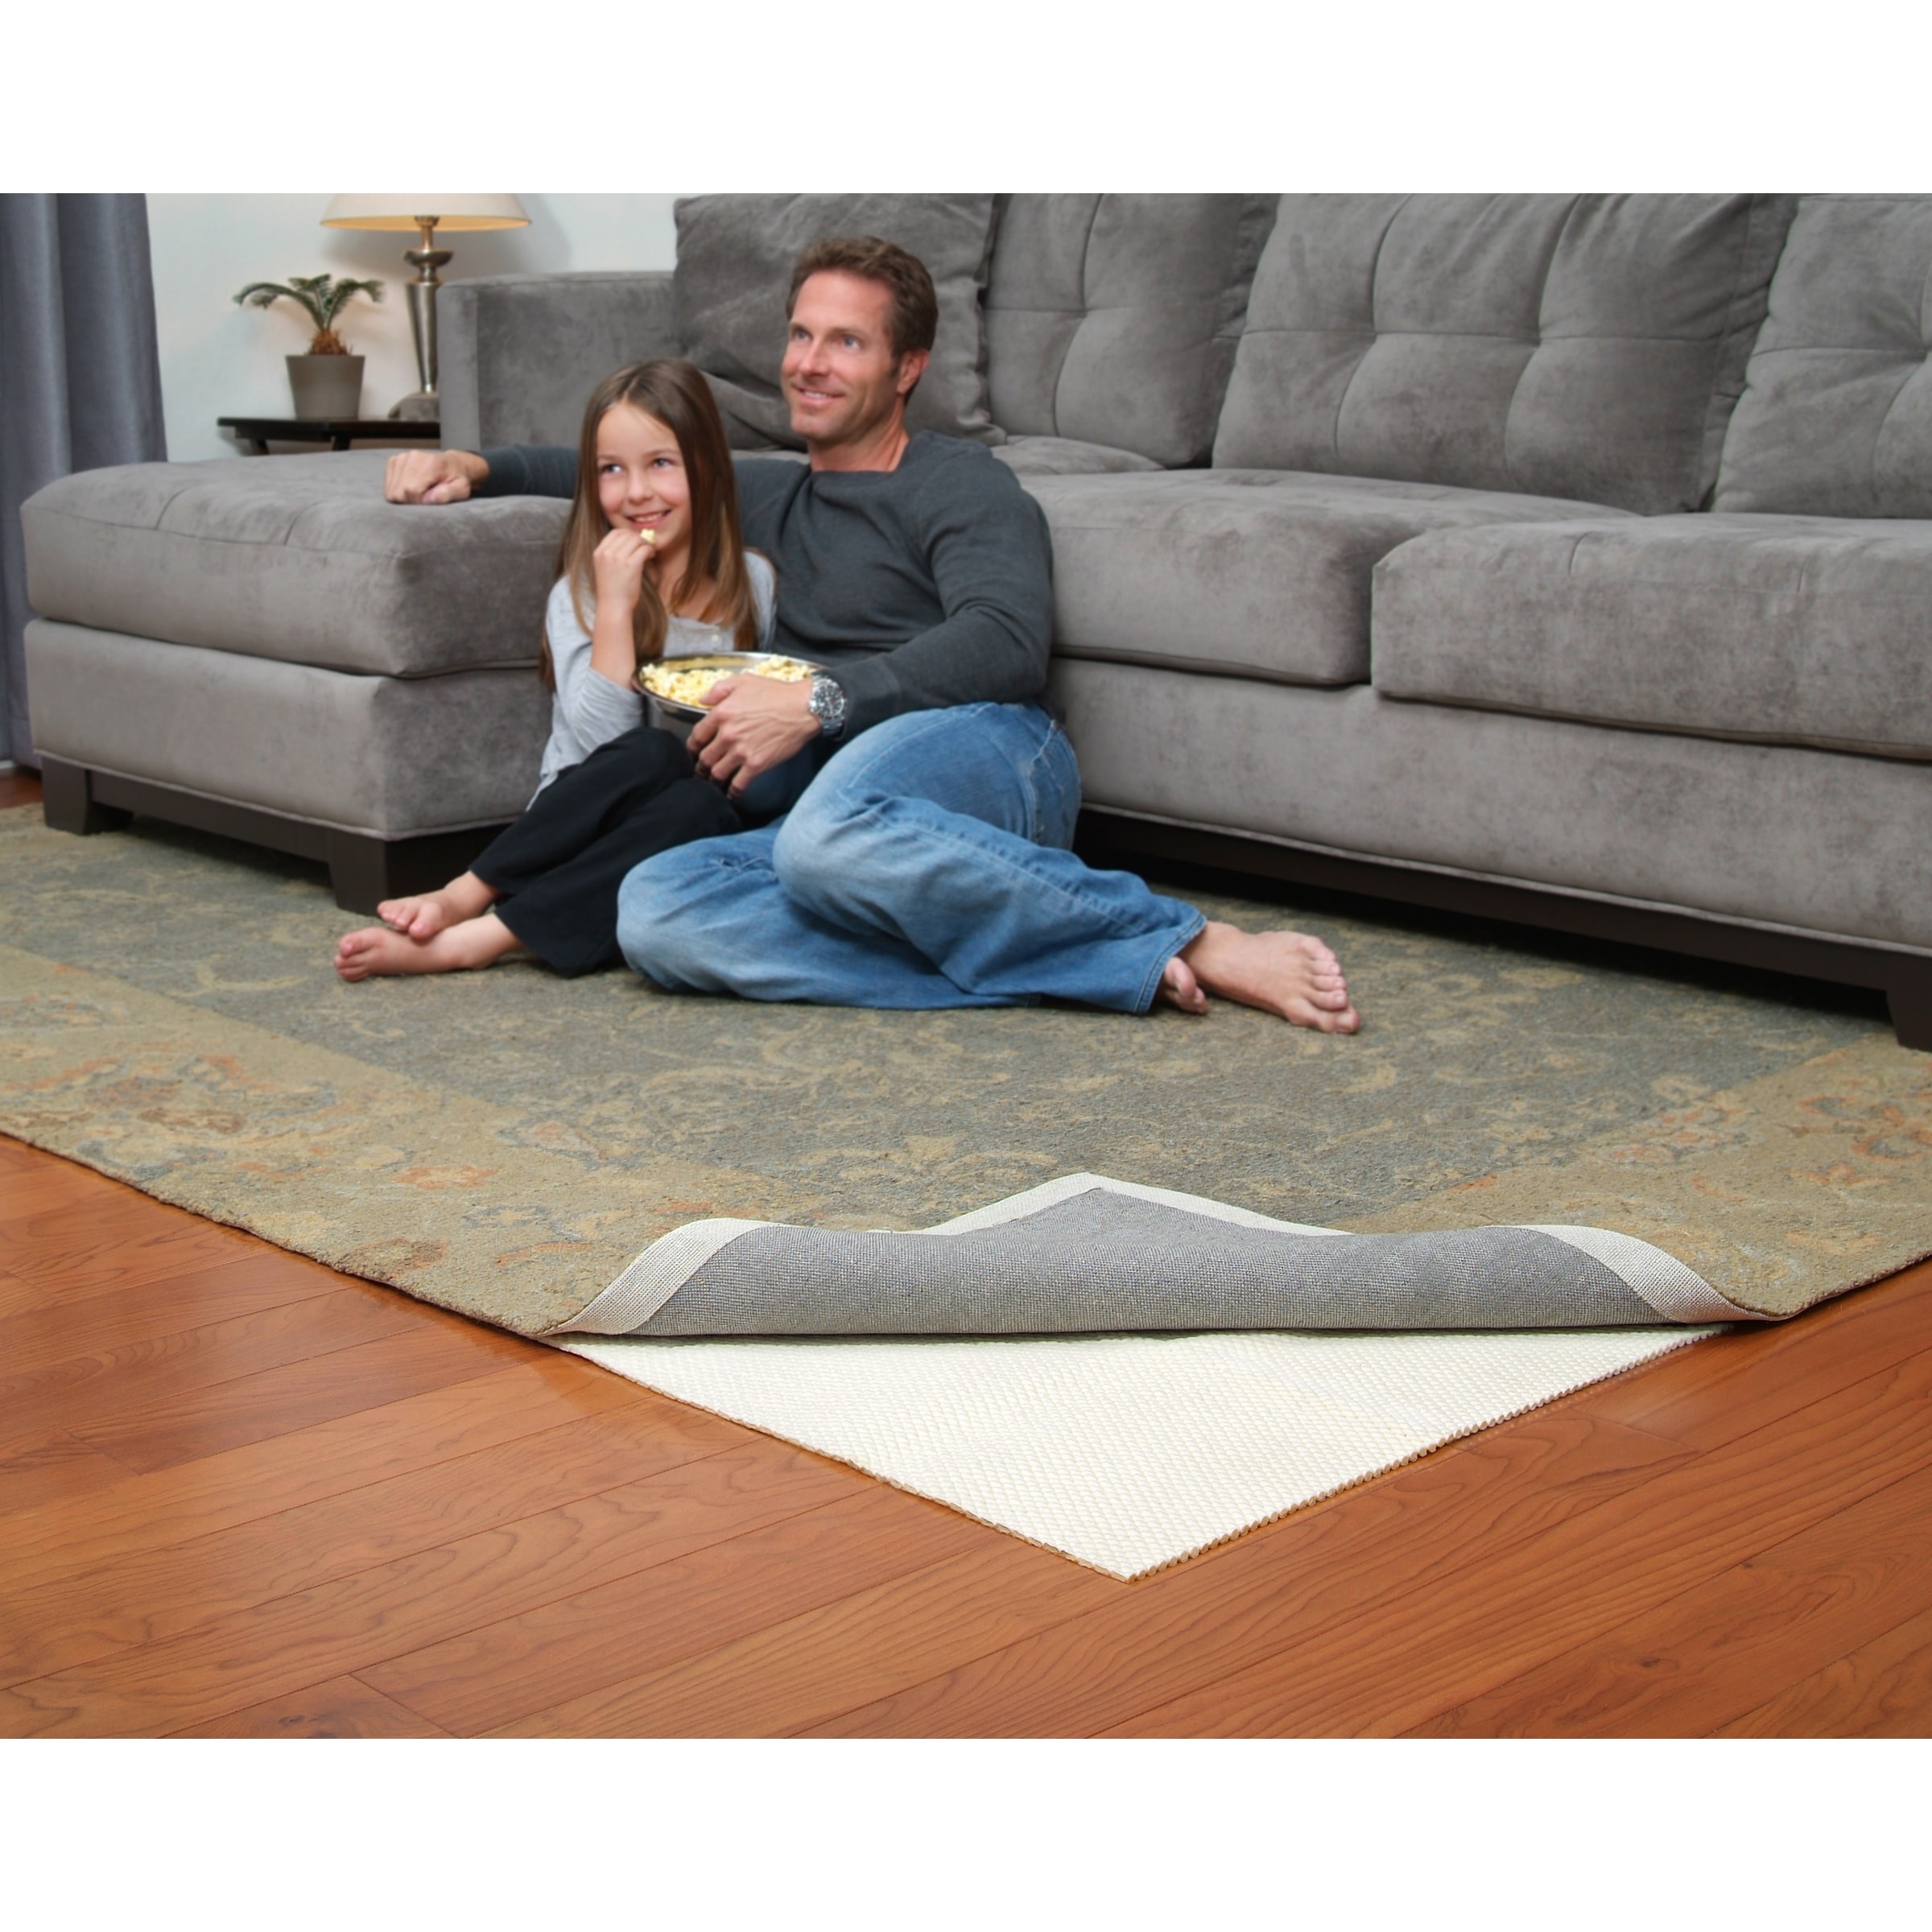 https://ak1.ostkcdn.com/images/products/is/images/direct/33c27ad1d073d6e24835839a89cffe2f5eb6d8c7/Con-Tact-Brand-Eco-Stay-Non-slip-Rug-Pad-%288%27-x-10%27%29.jpg